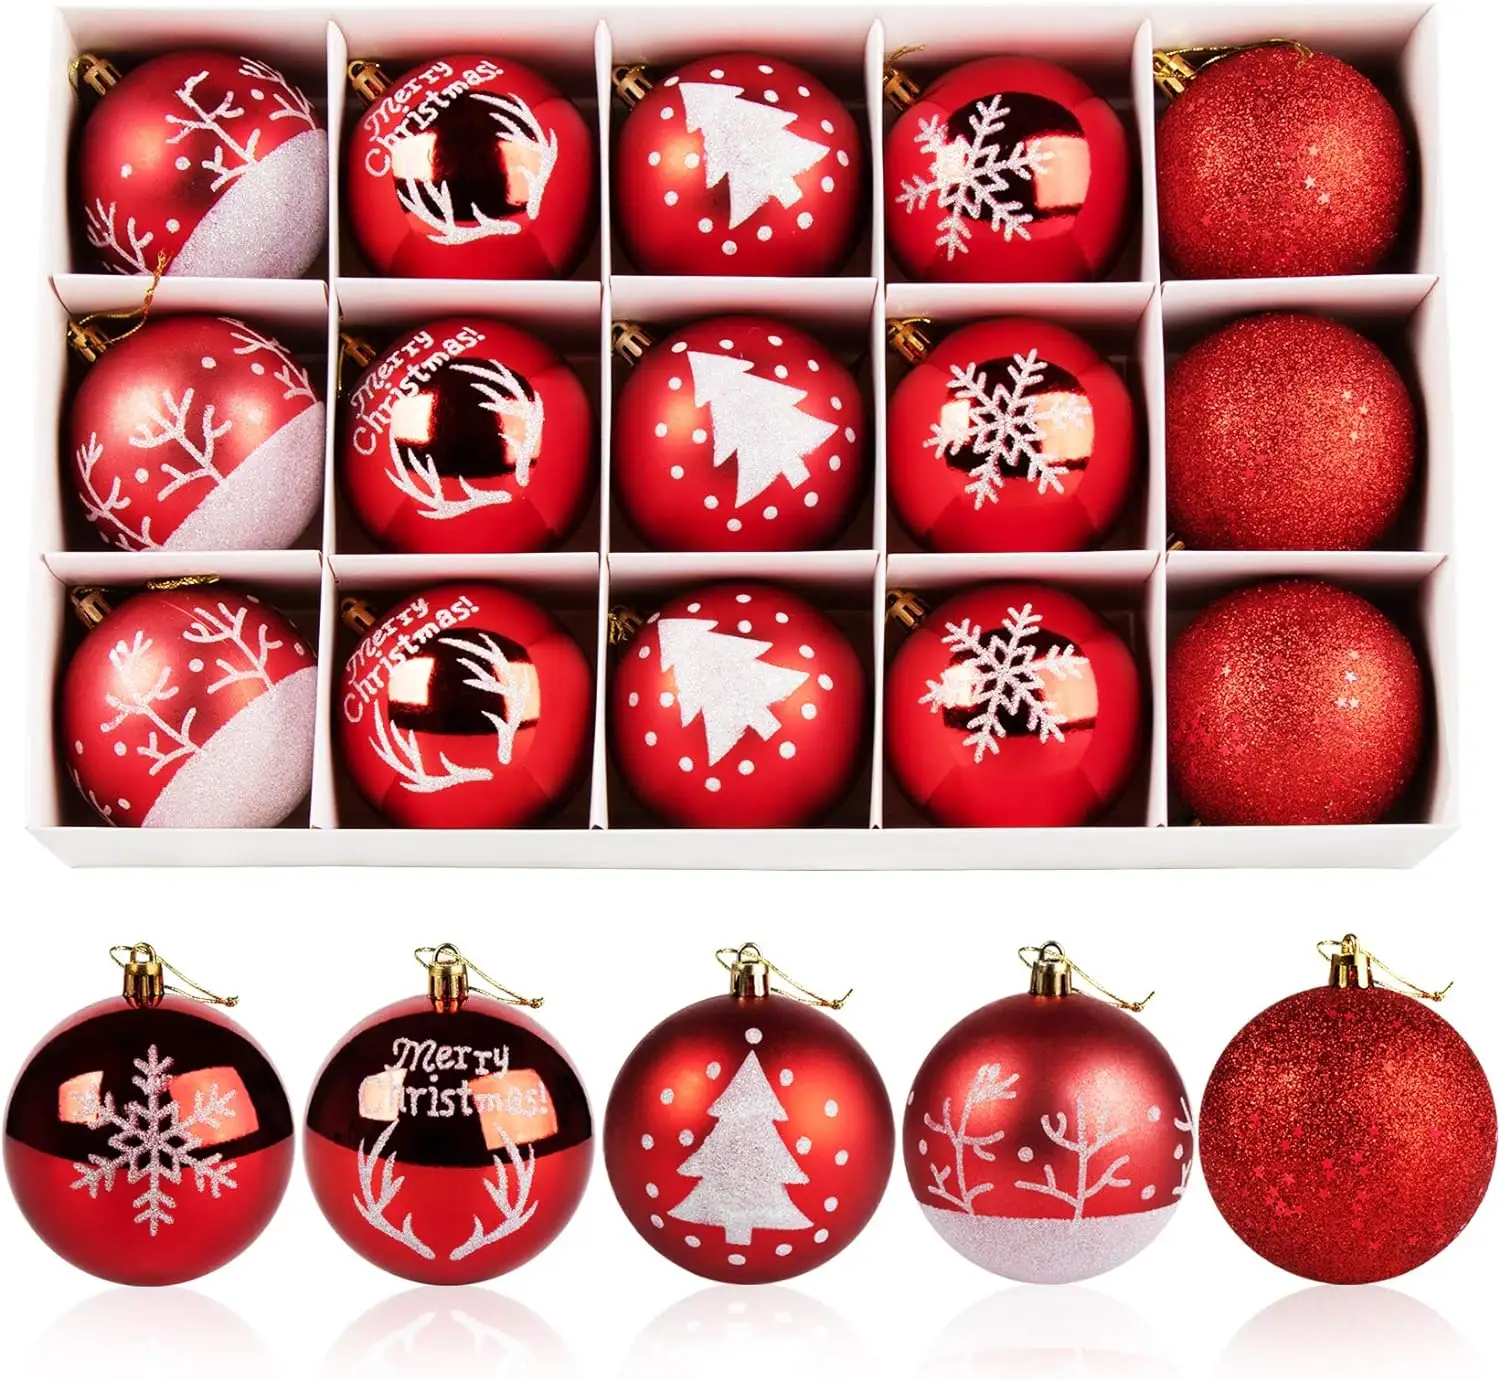 yiwu Merry Tree Amazon hot sale 8cm red and white painted plastic Christmas ball with hand painted designs for tree decorations